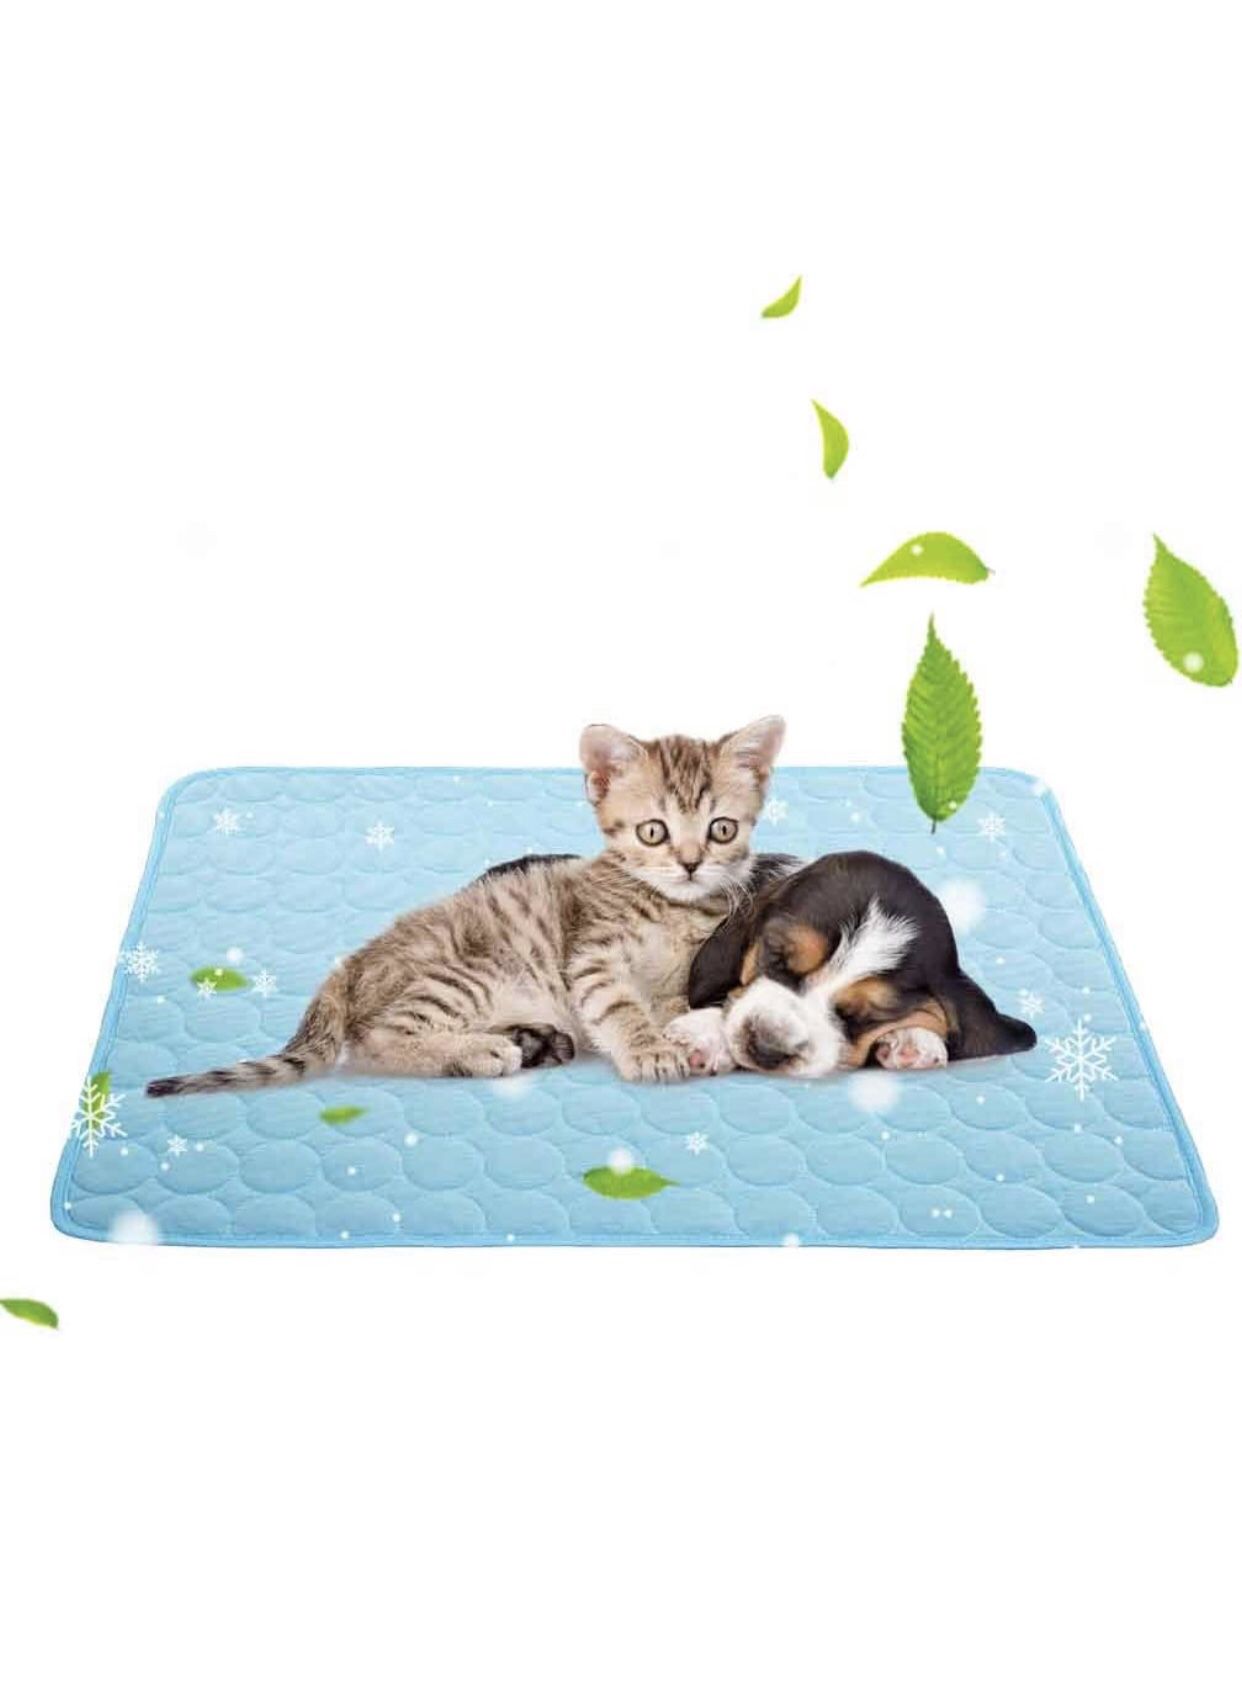 Jaaytct Cooling Mat for Dogs Cats Ice Silk Pet Self Cooling Pad Blanket for Pet Beds/Kennels/Couches /Car Seats/Floors Size Large 